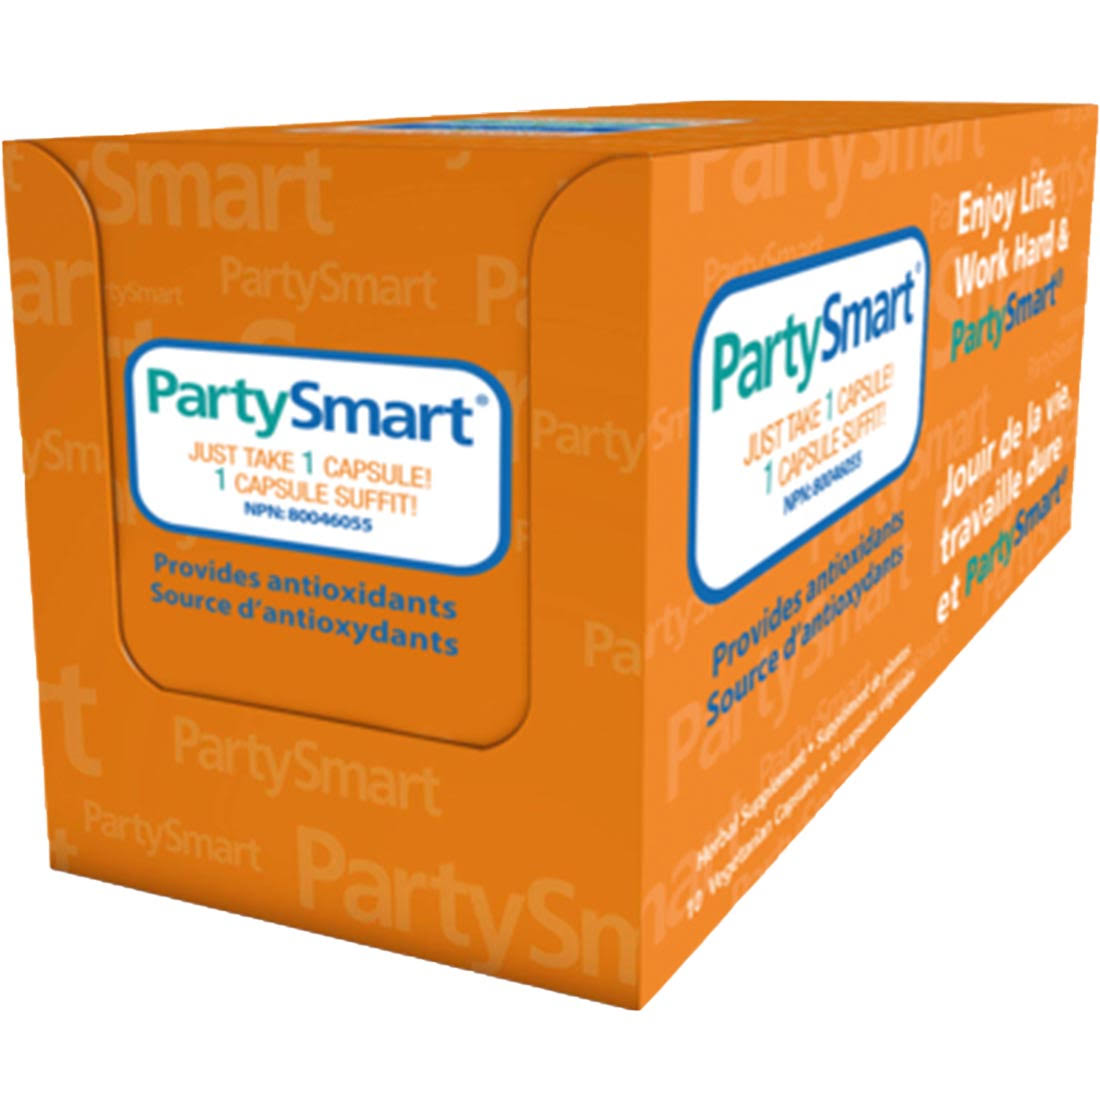 Himalaya Party Smart Hangover Prevention Supplement - 10 Single Packs